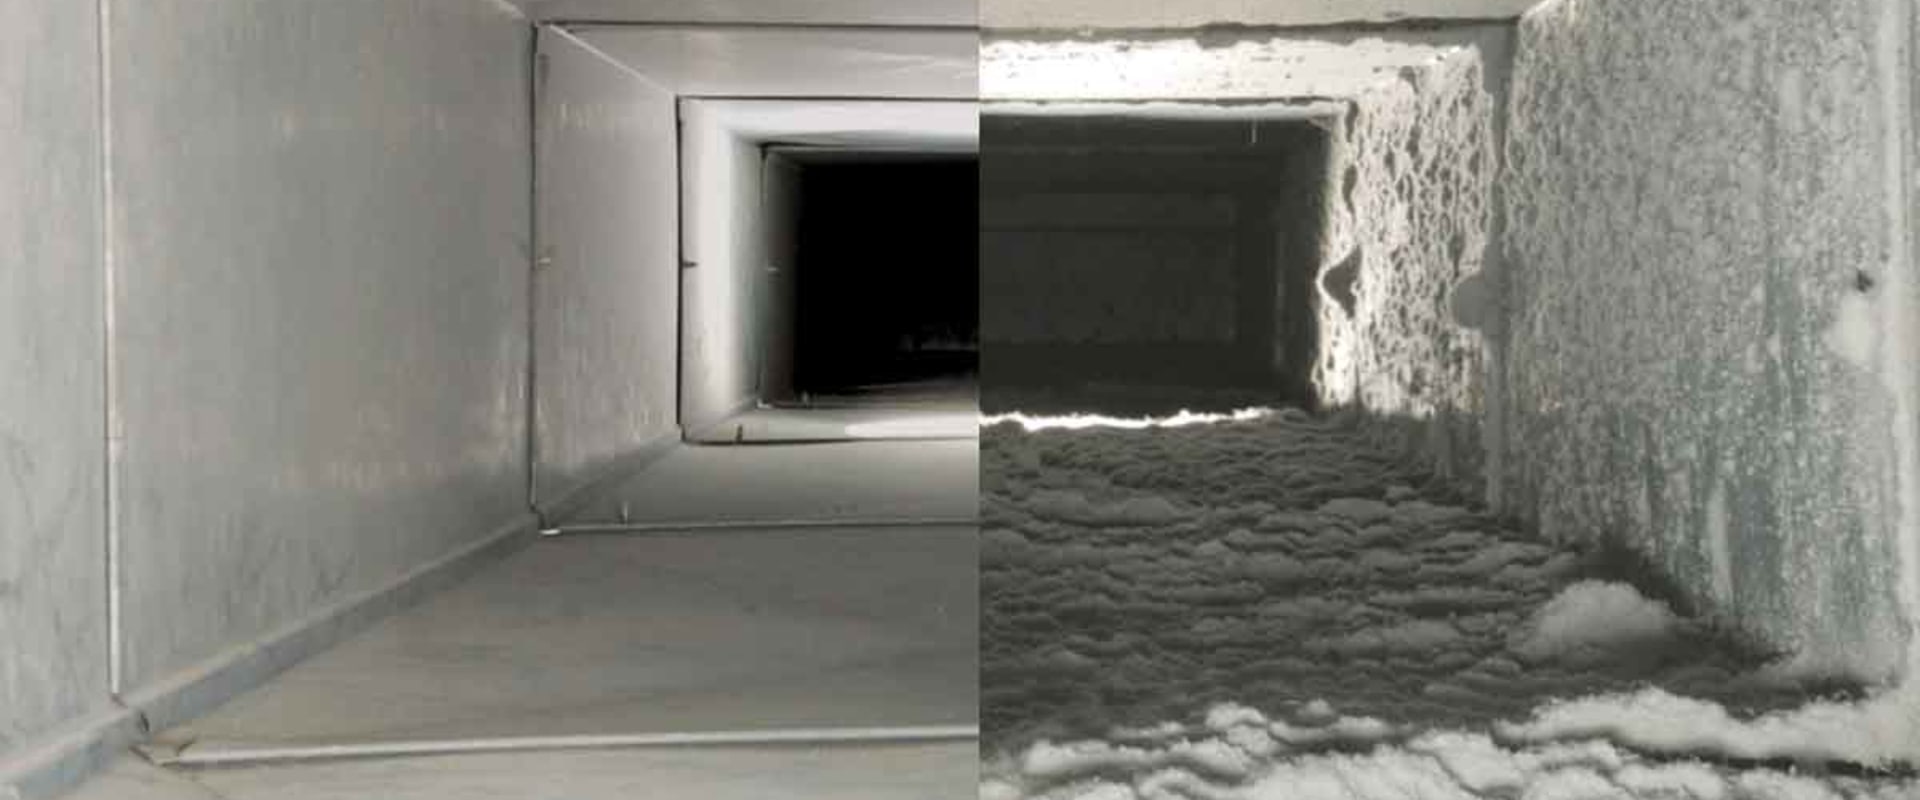 Air Duct Sealing Services in Miami-Dade County, Florida: What You Need to Know